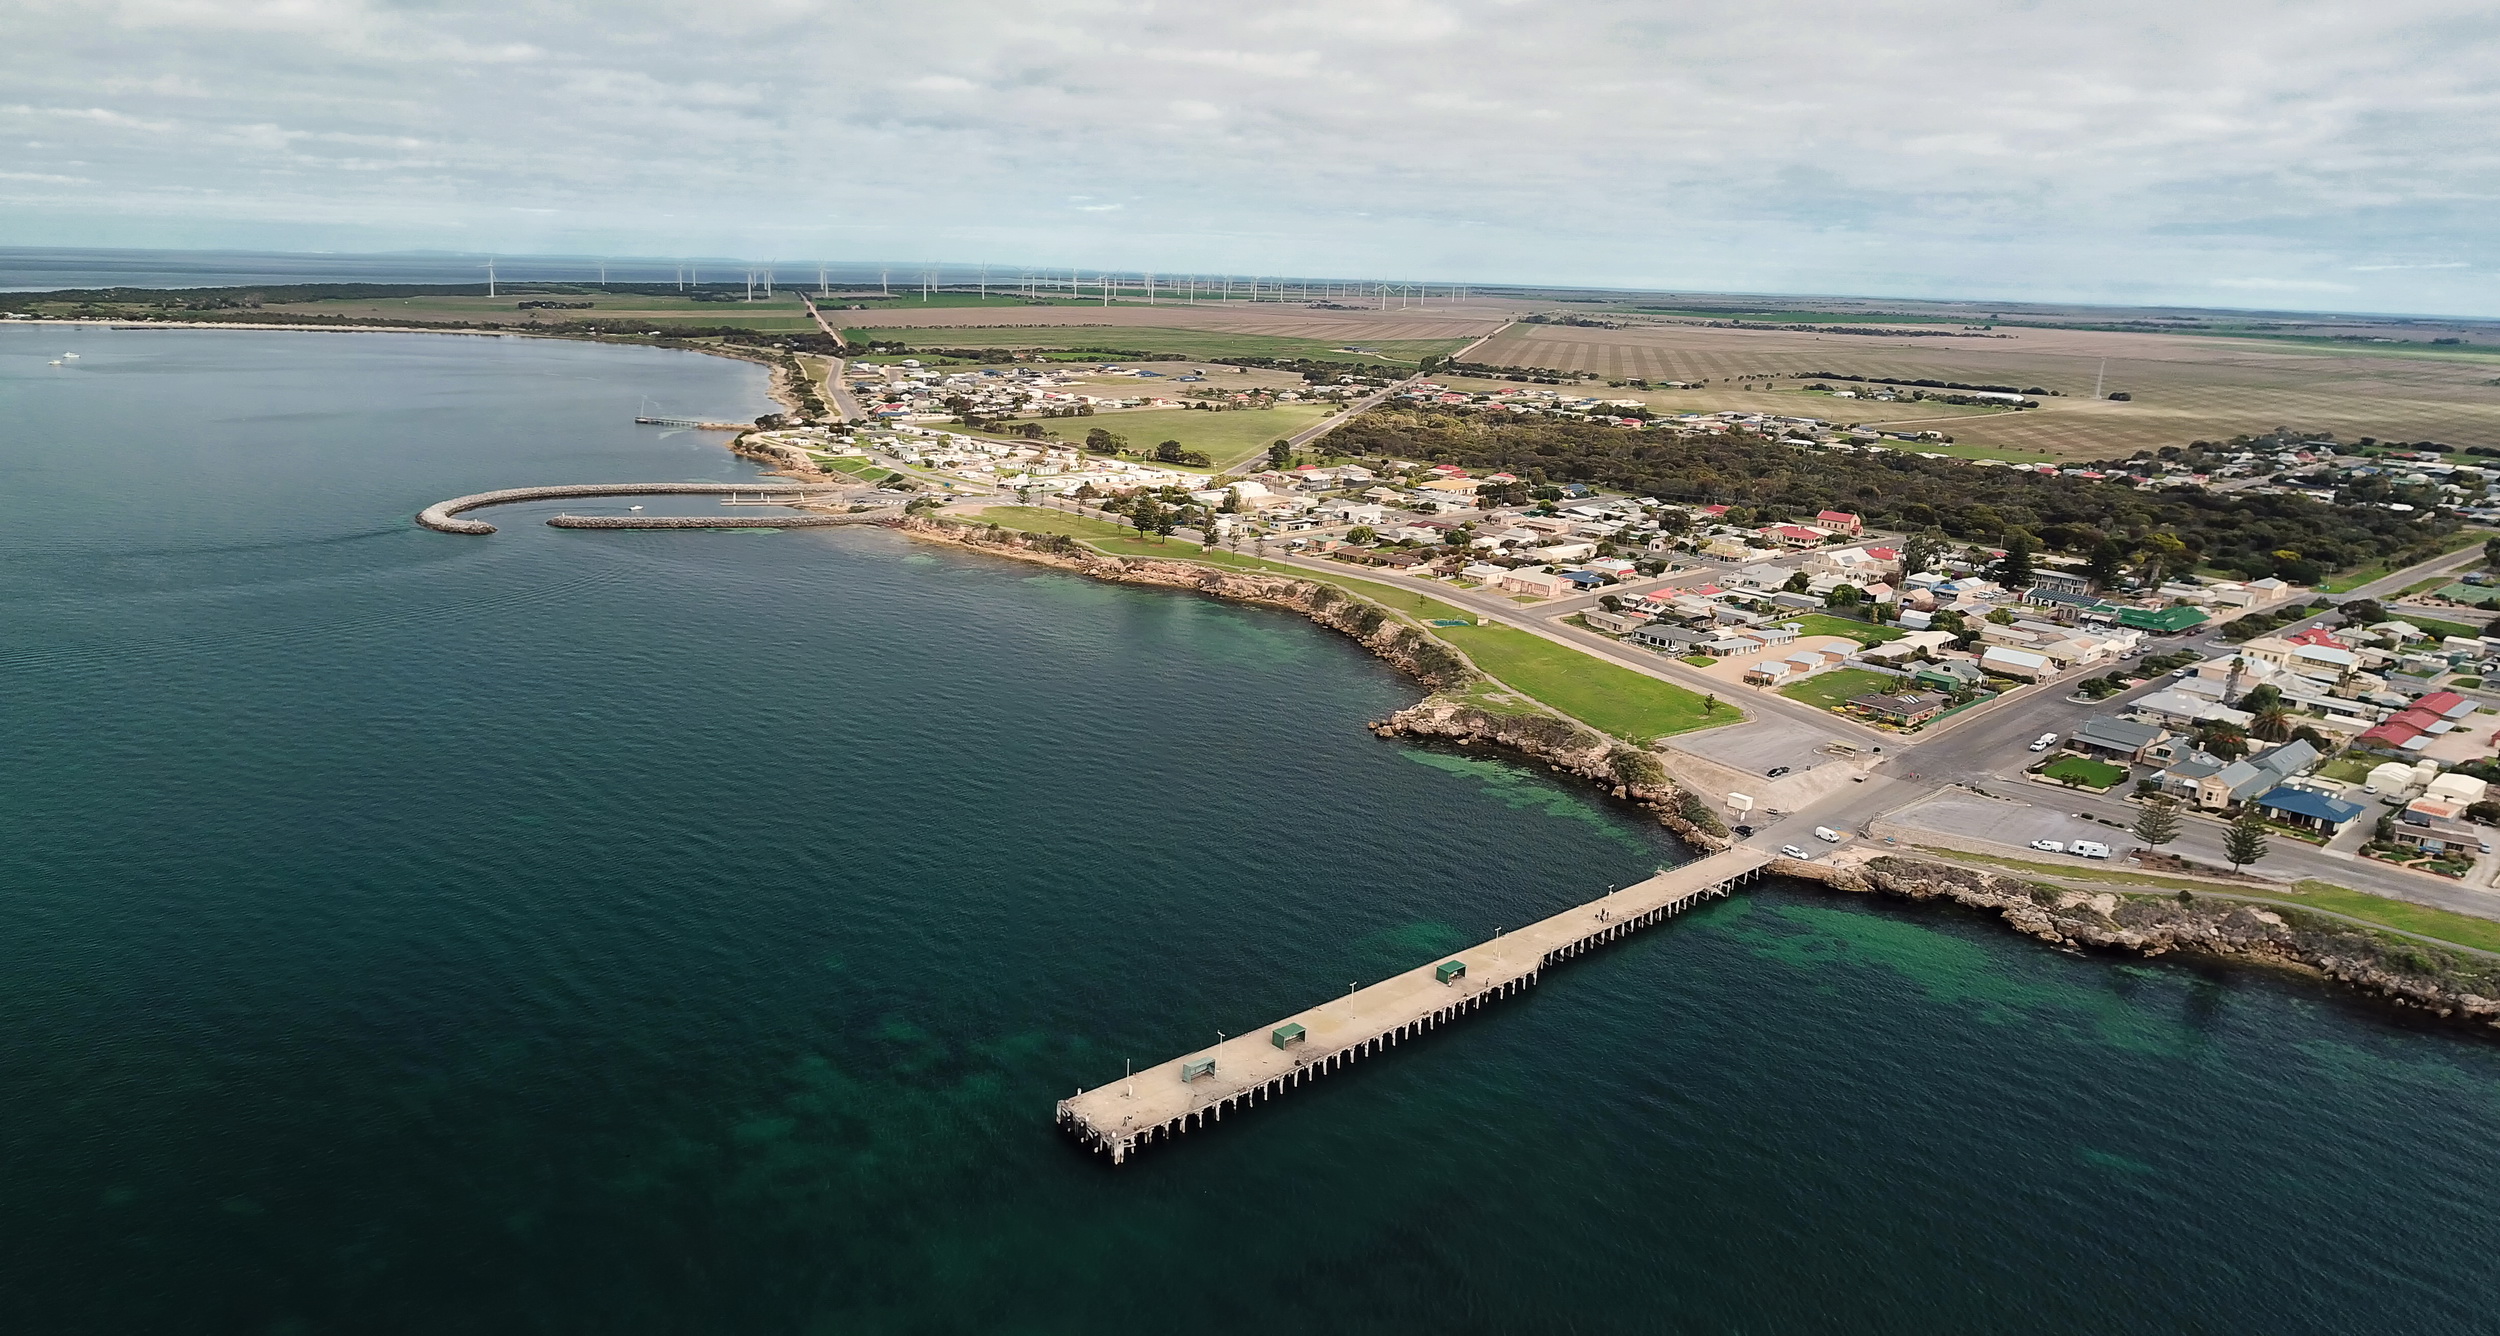 Aerial view of Edithburgh Jetty